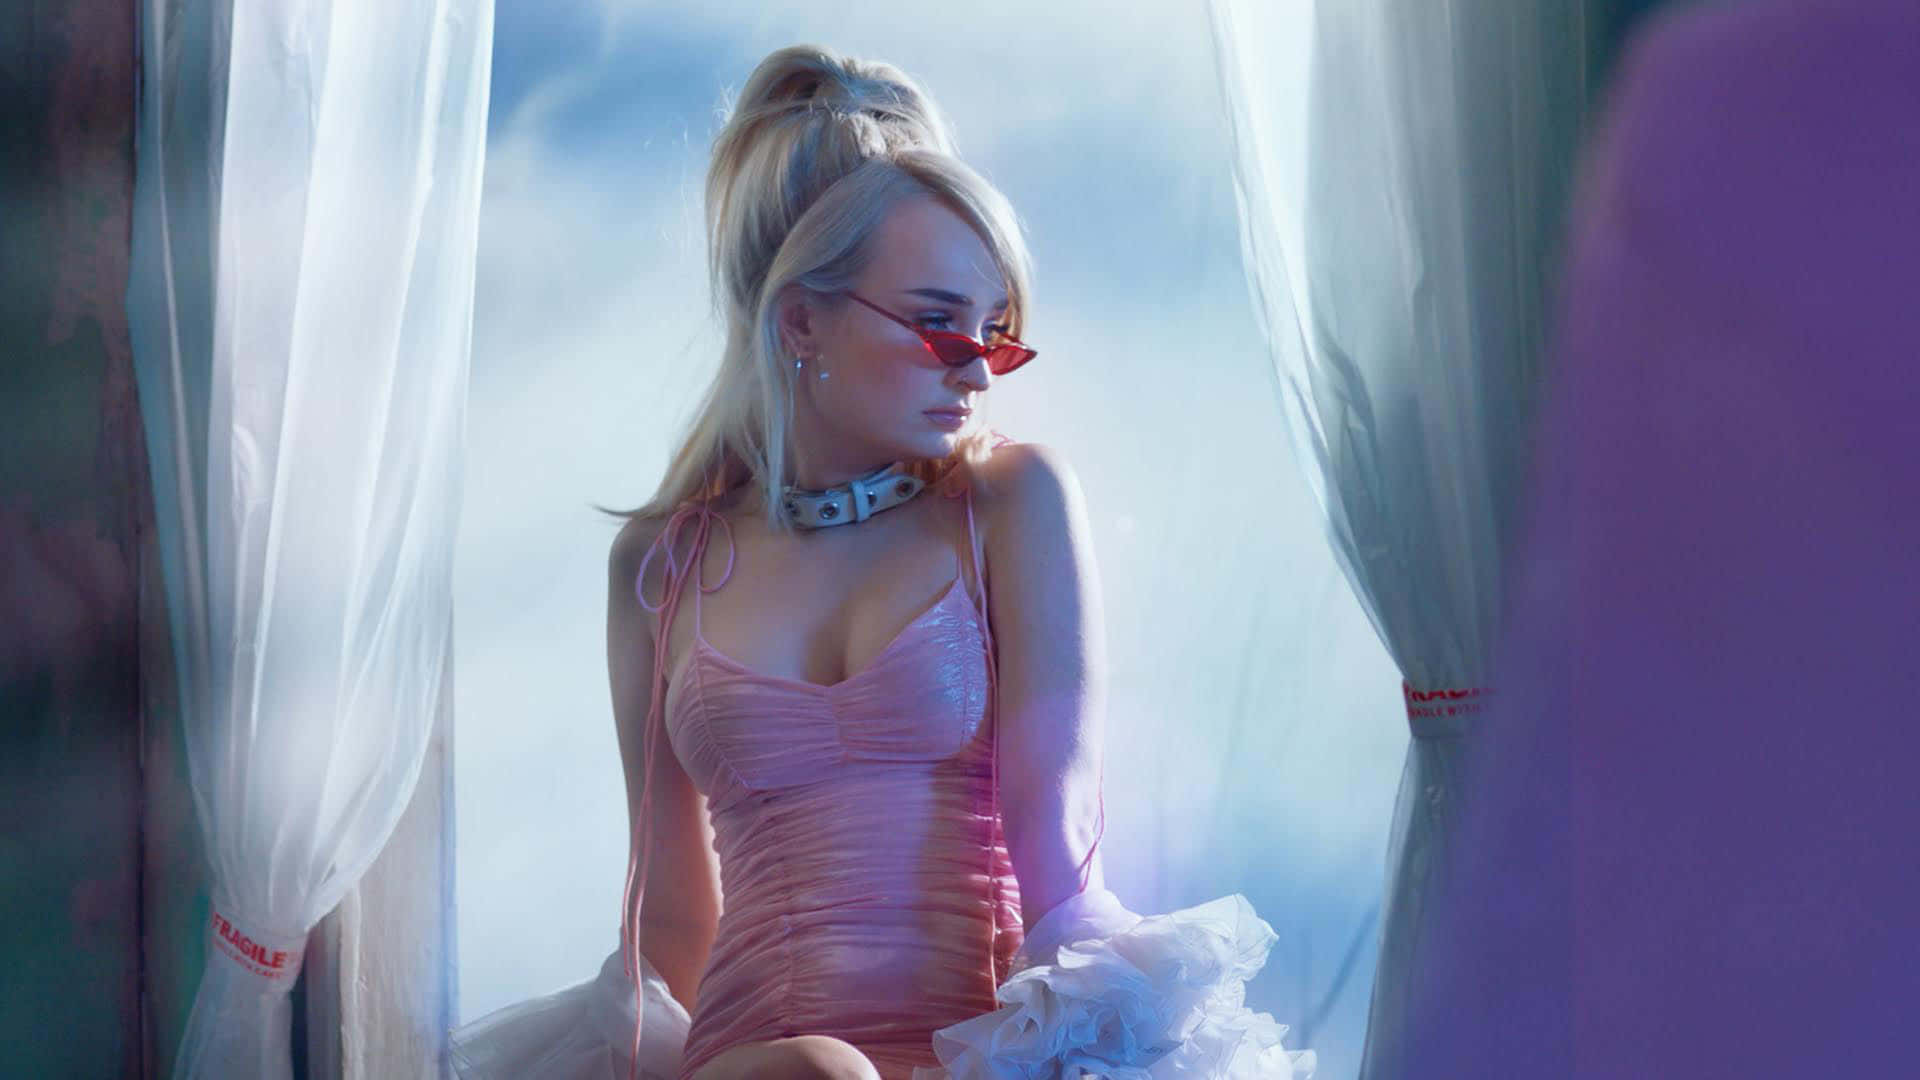 Caption: Kim Petras Gracefully Performs On Stage Wallpaper